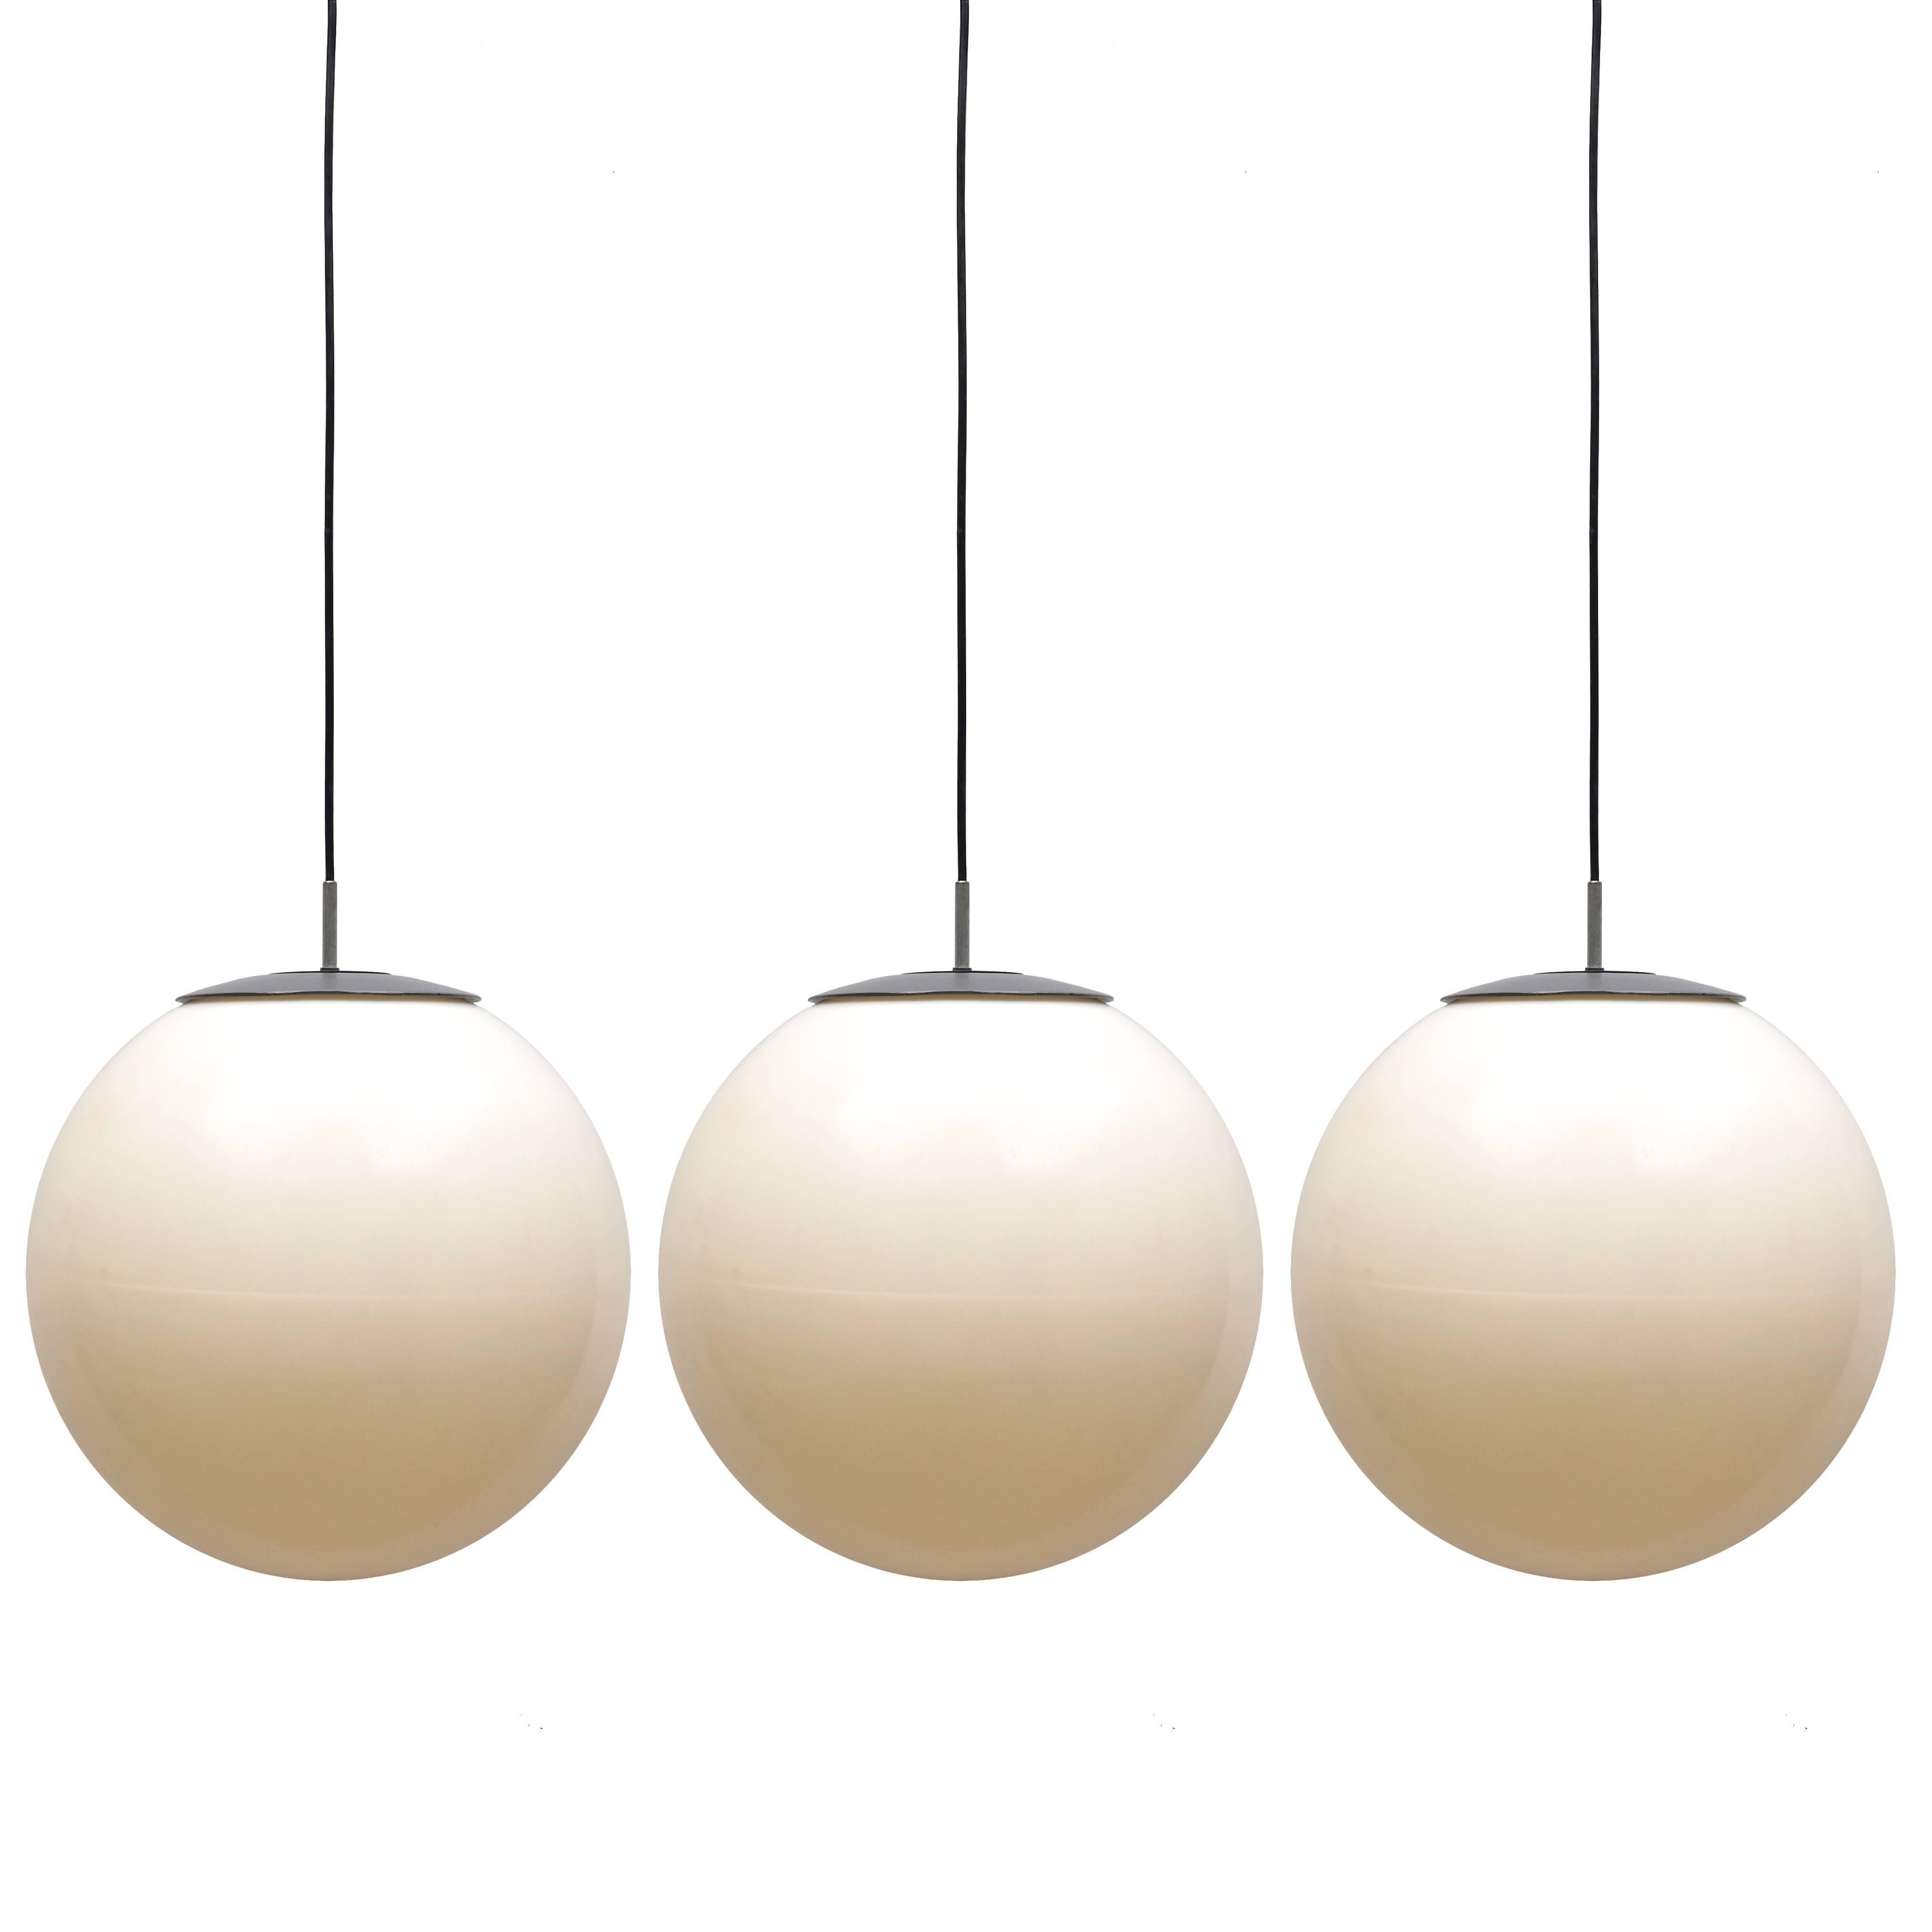 Set of 1960s Three Large Ball Hanging Lights in White Plastic For at 1stDibs ball lights hanging, hanging ball lights, hanging ball